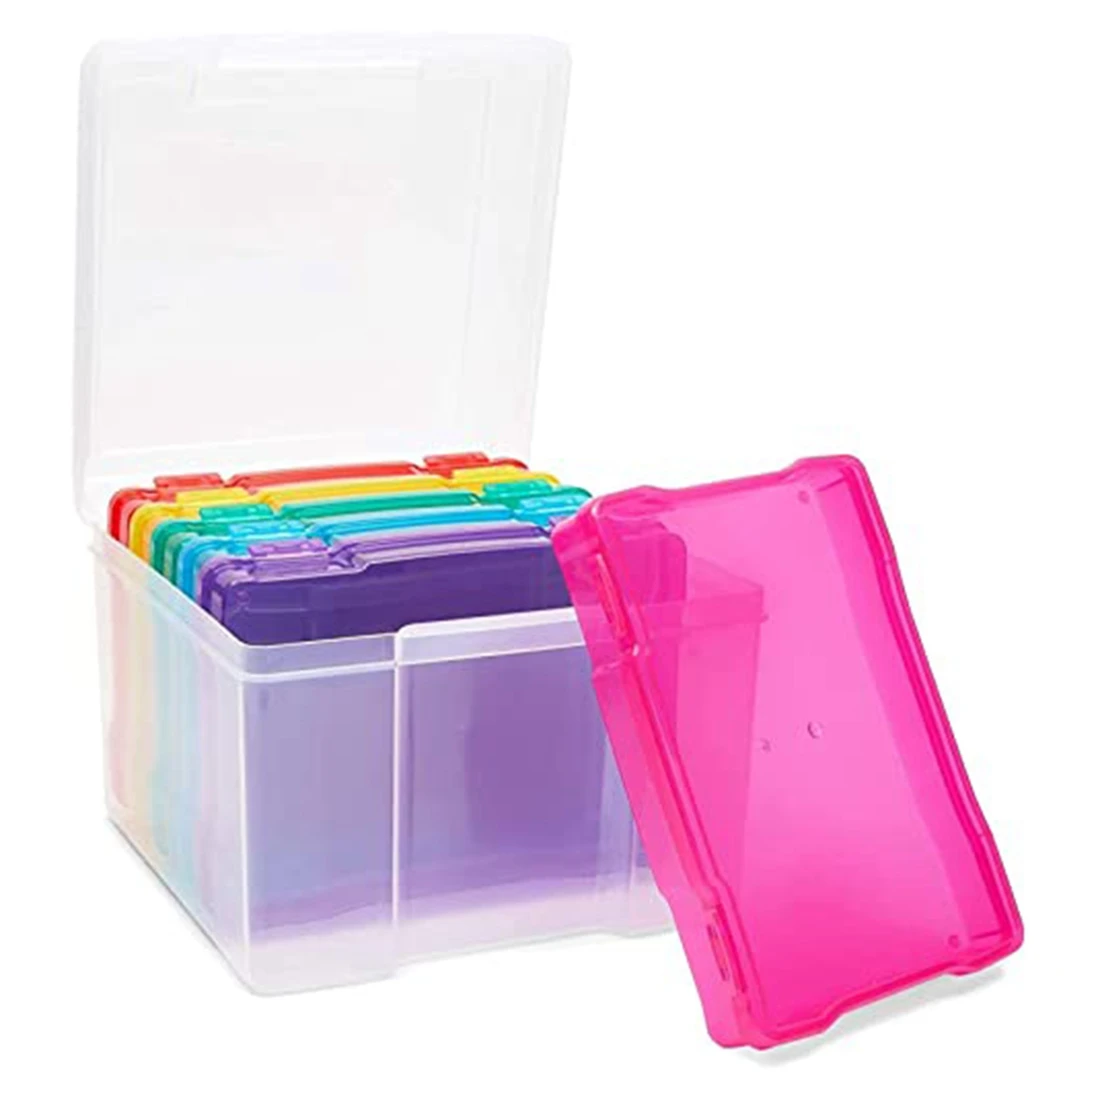 

5X7 inch Photos Cases and Clear Craft Keeper with Buckle Design 6 Inner Cases Plastic Storage Container Box A